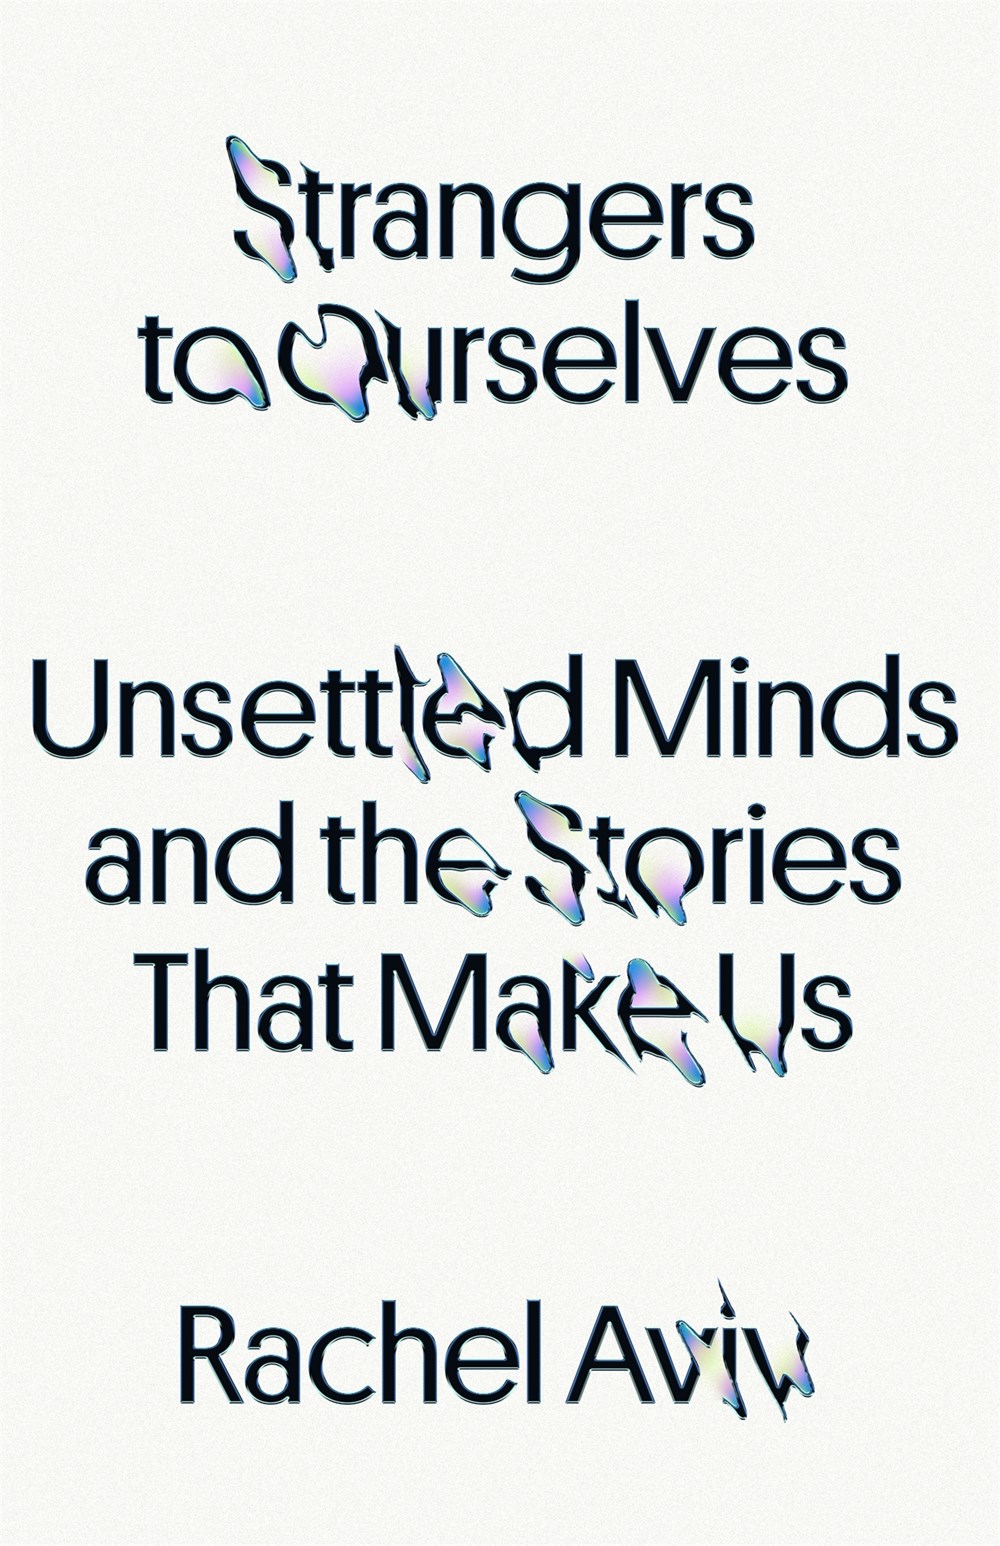 Image of "Strangers to Ourselves: Unsettled Minds and the Stories That Make Us"